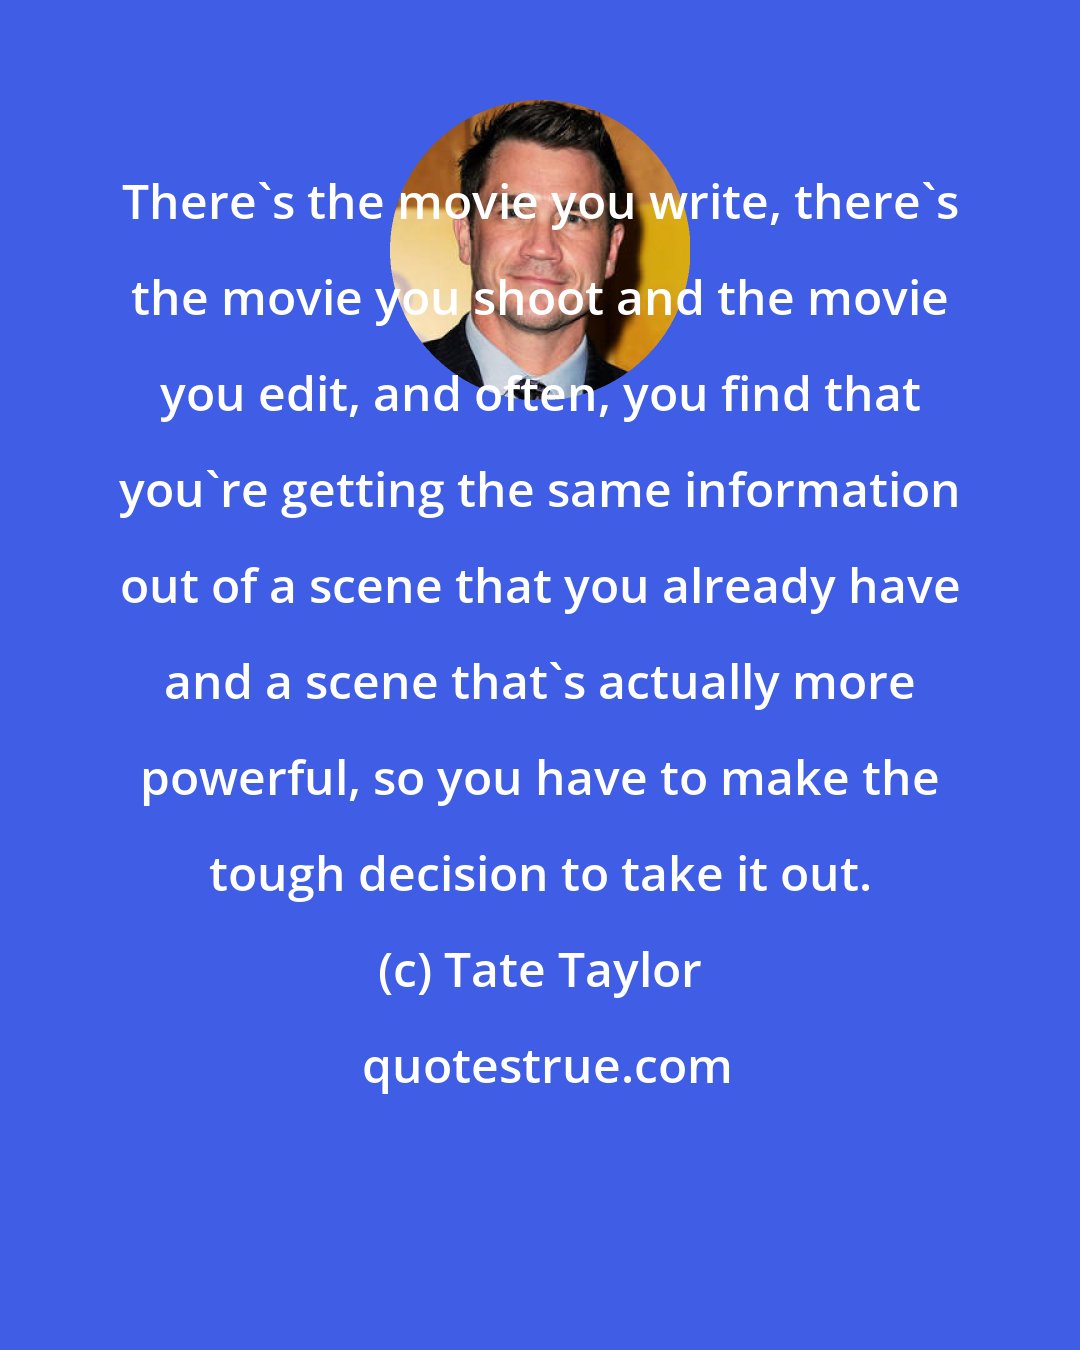 Tate Taylor: There's the movie you write, there's the movie you shoot and the movie you edit, and often, you find that you're getting the same information out of a scene that you already have and a scene that's actually more powerful, so you have to make the tough decision to take it out.